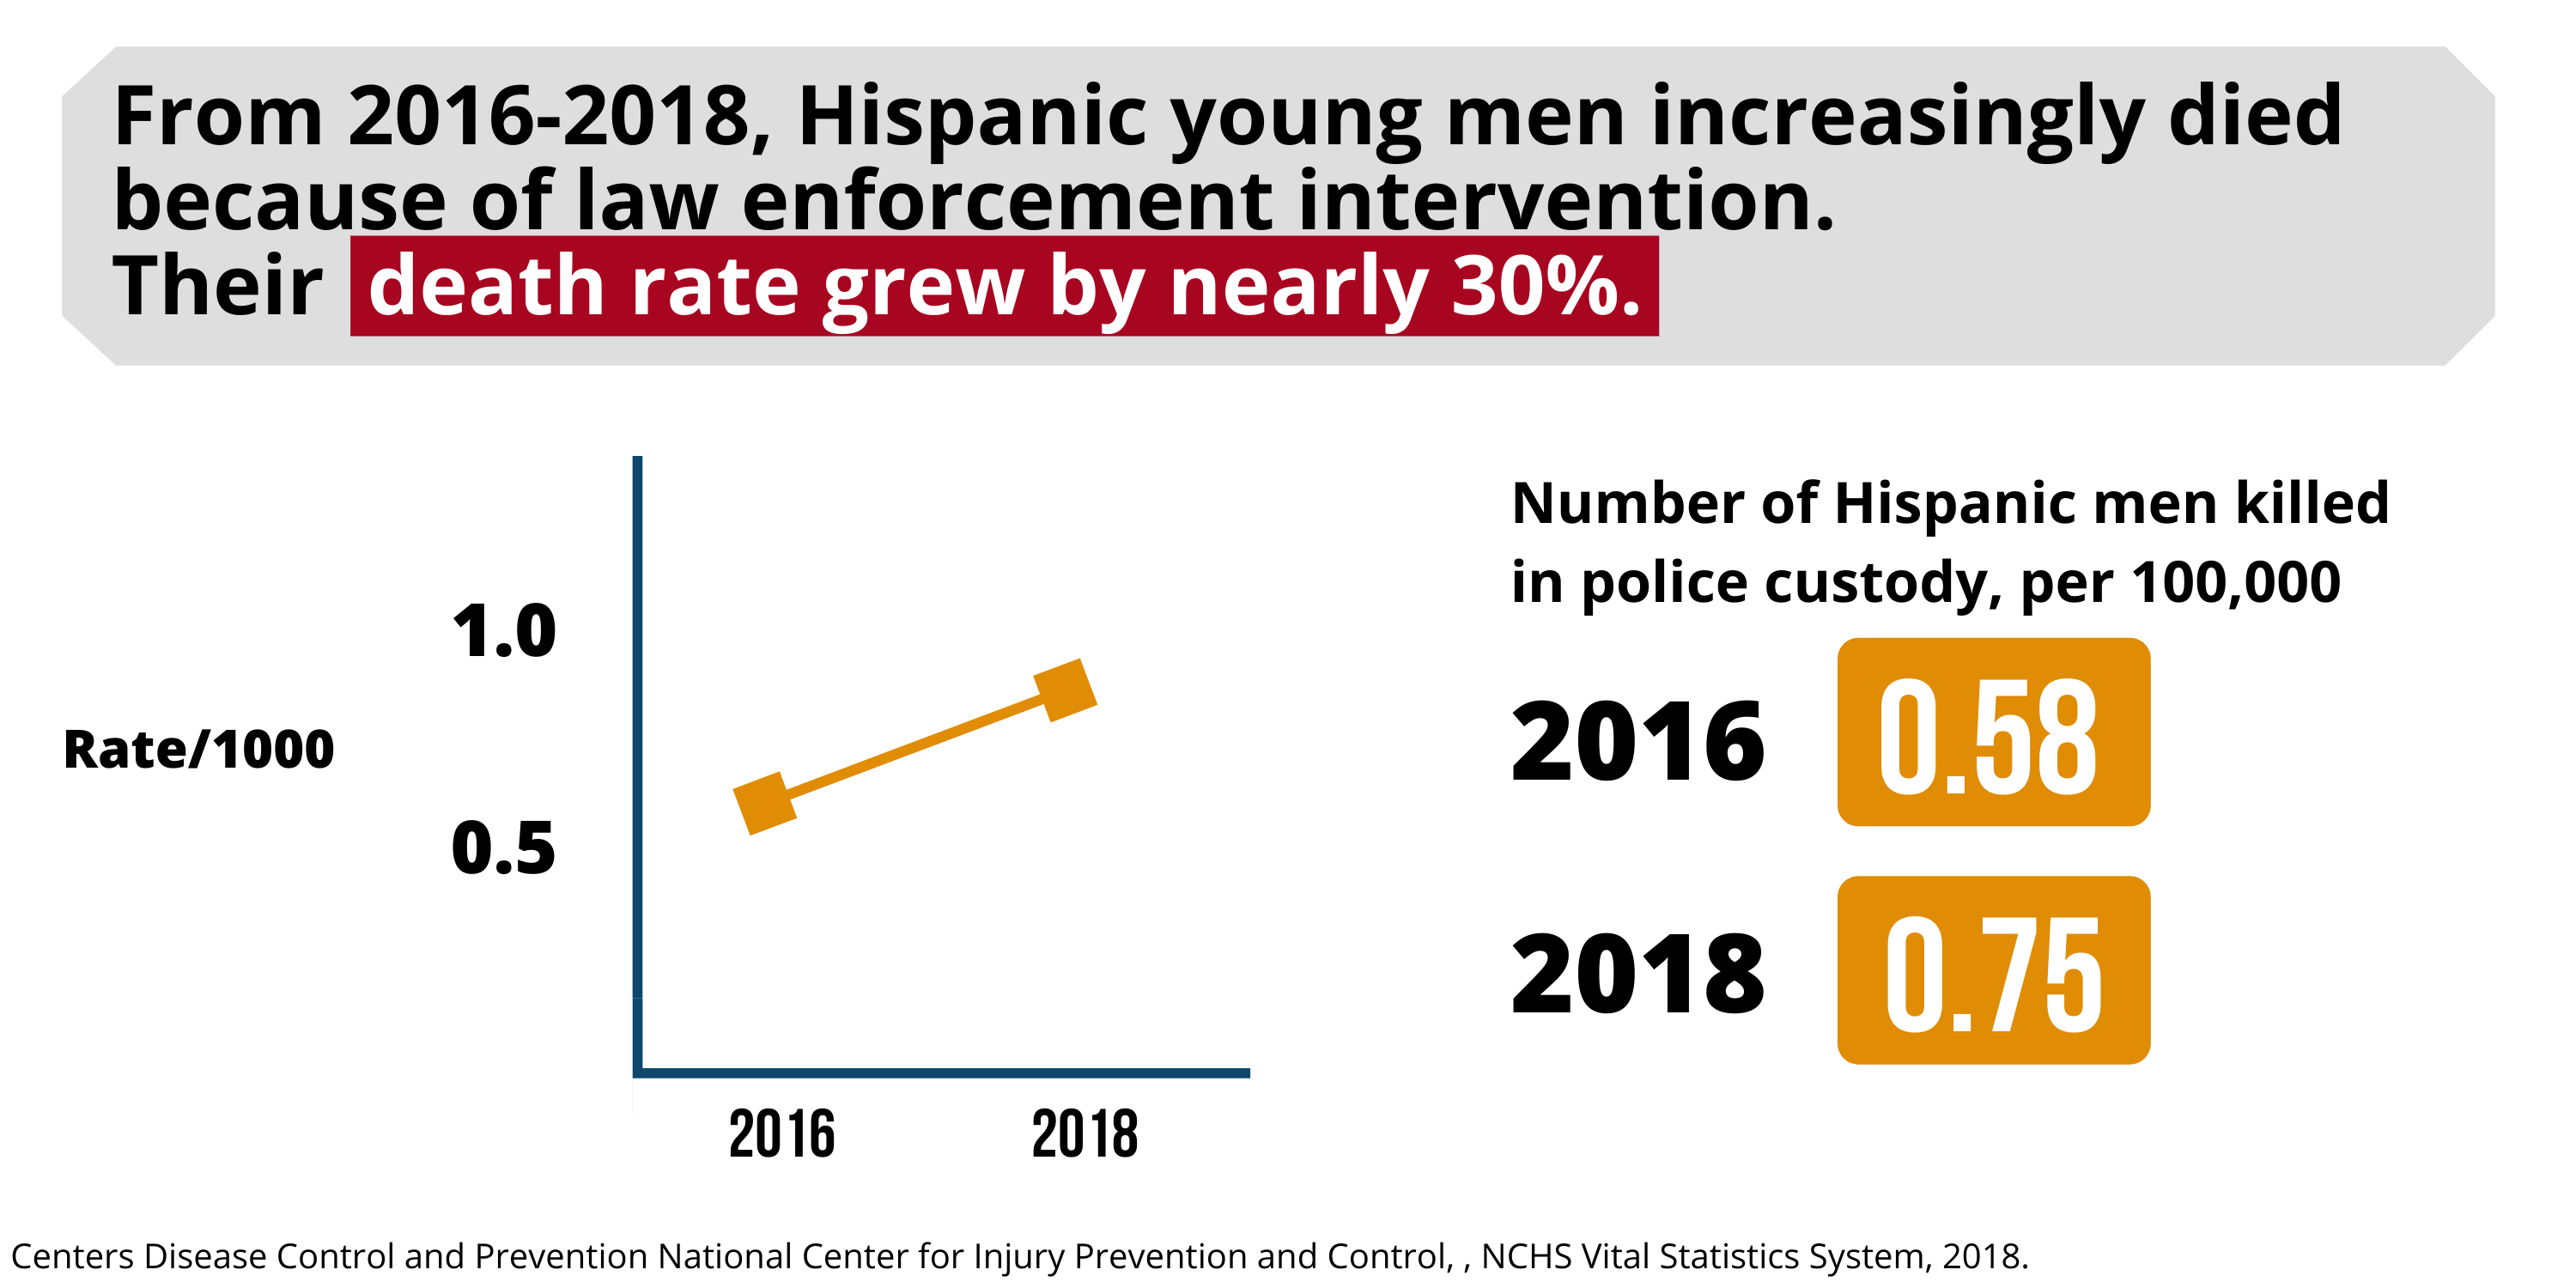 From 2016-2018, Hispanic young men increasingly died because of law enforcement intervention. 